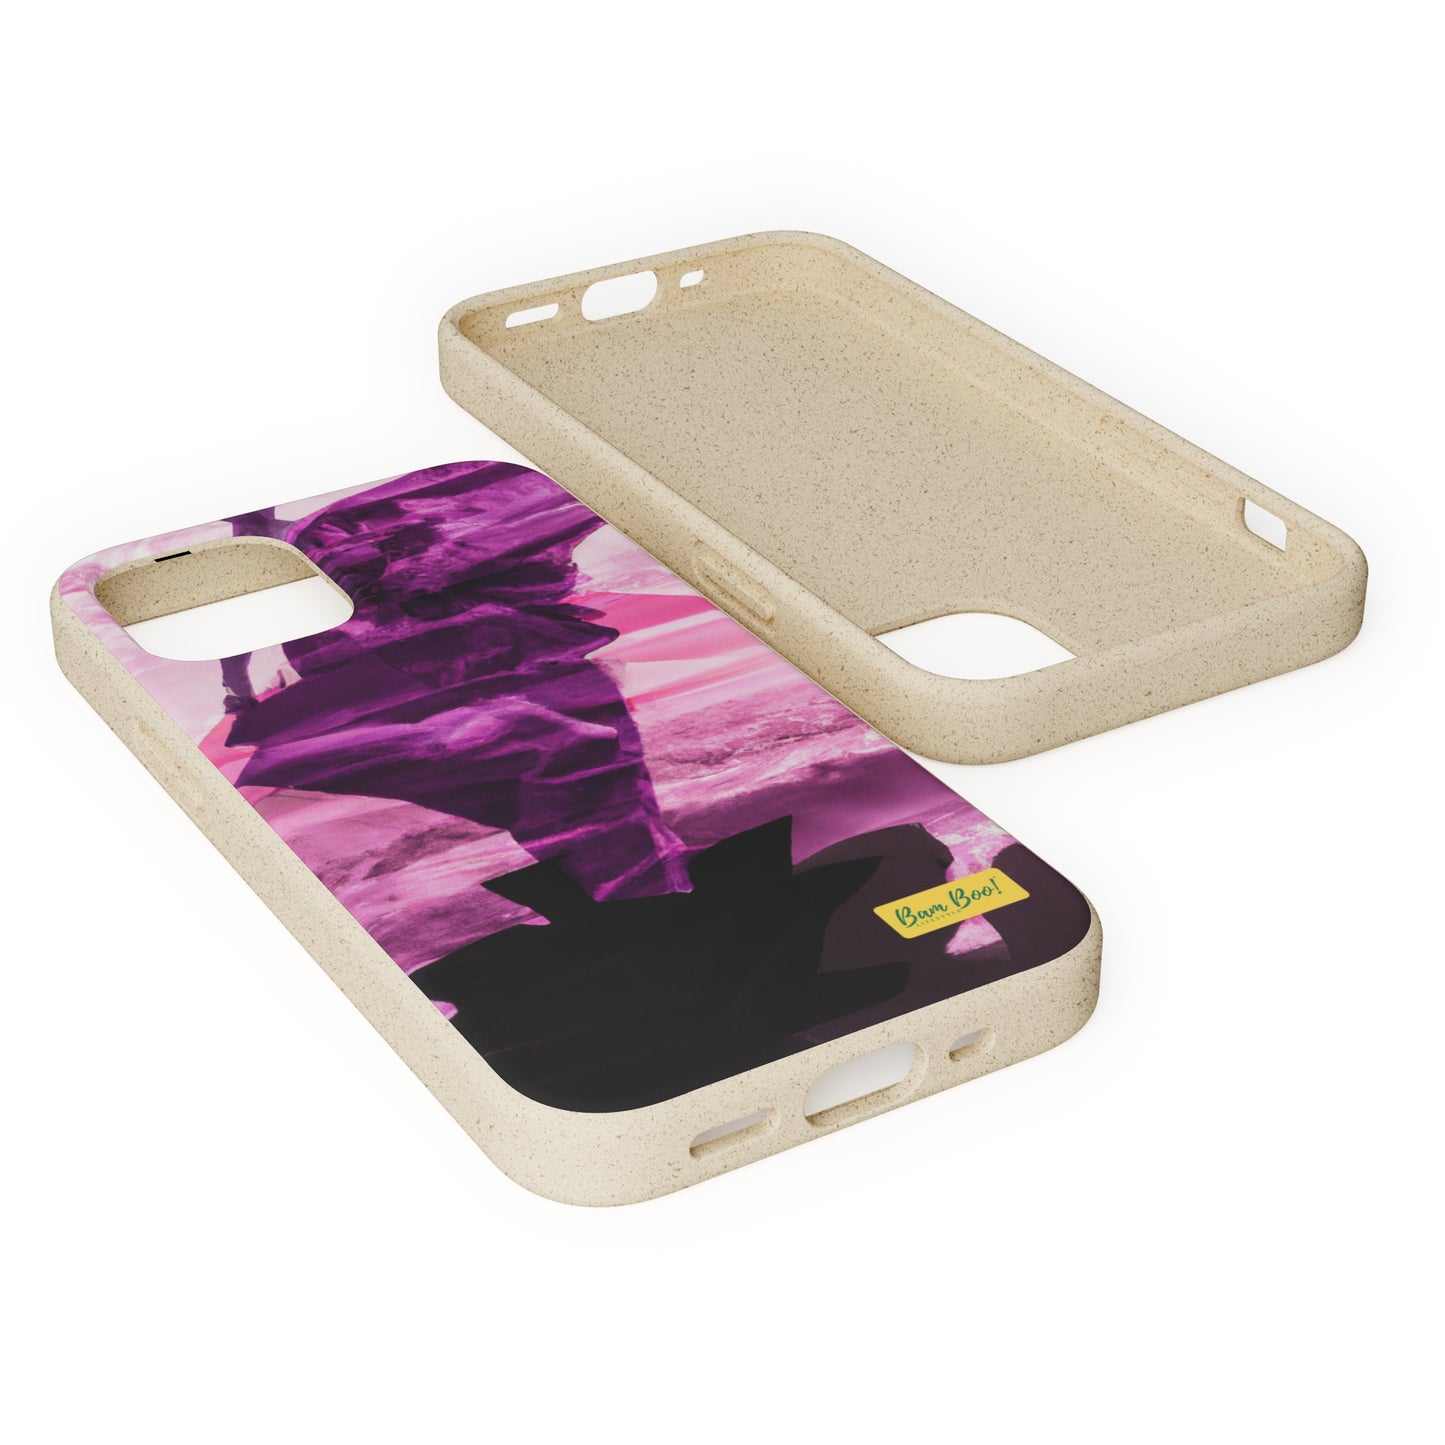 "The Timeless Mosaic" - Bam Boo! Lifestyle Eco-friendly Cases